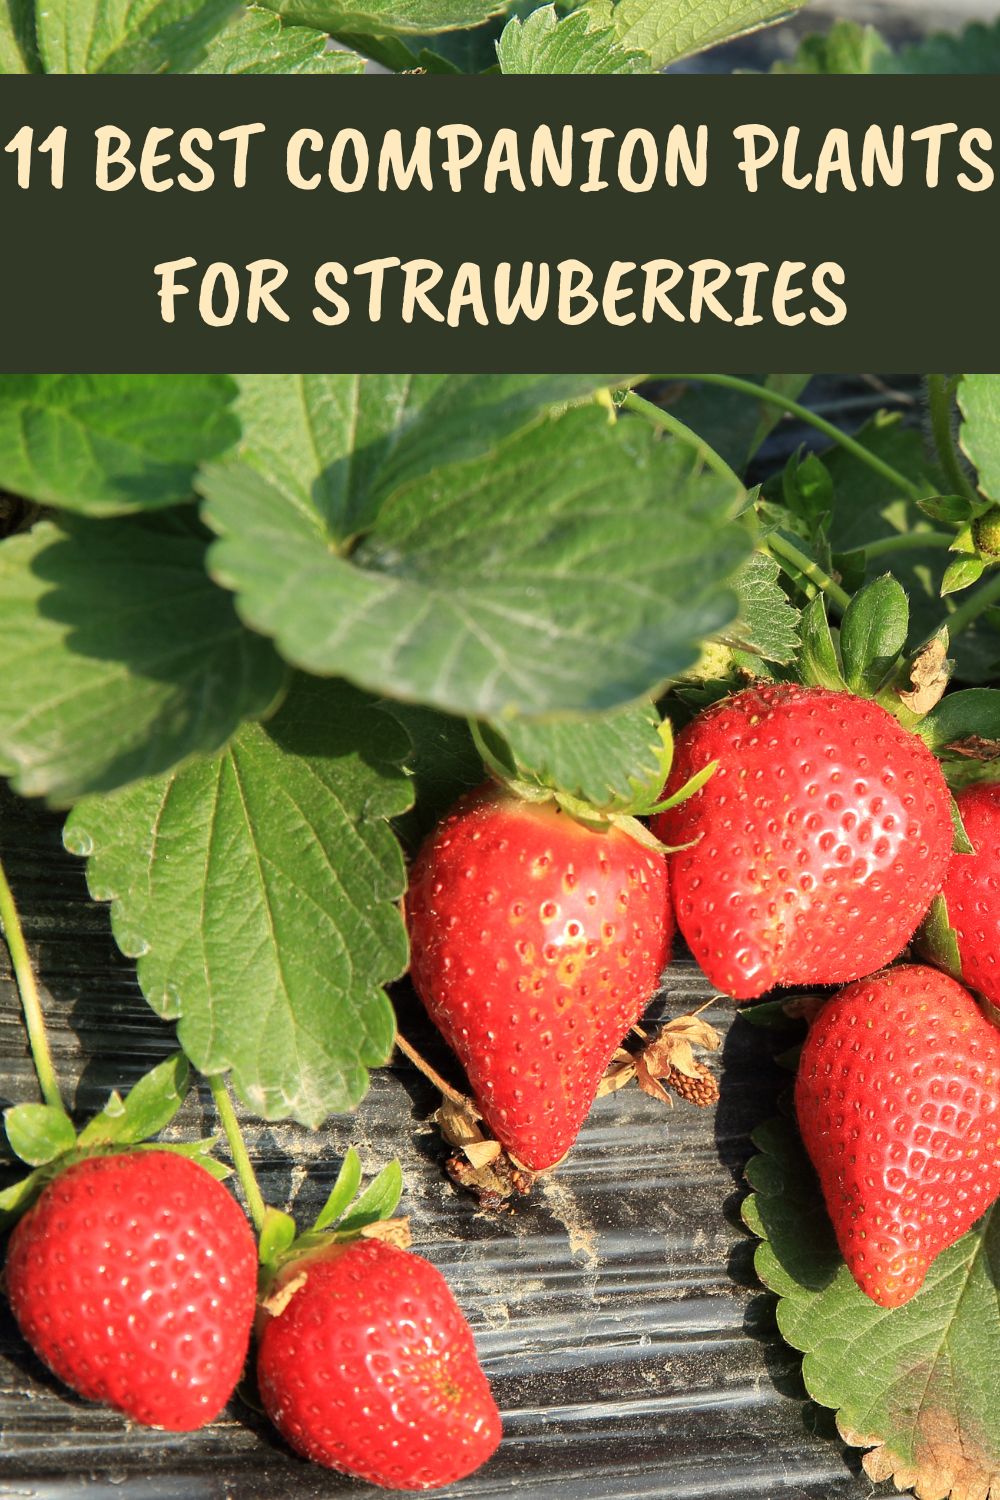 11 Best Companion Plants for Strawberries.